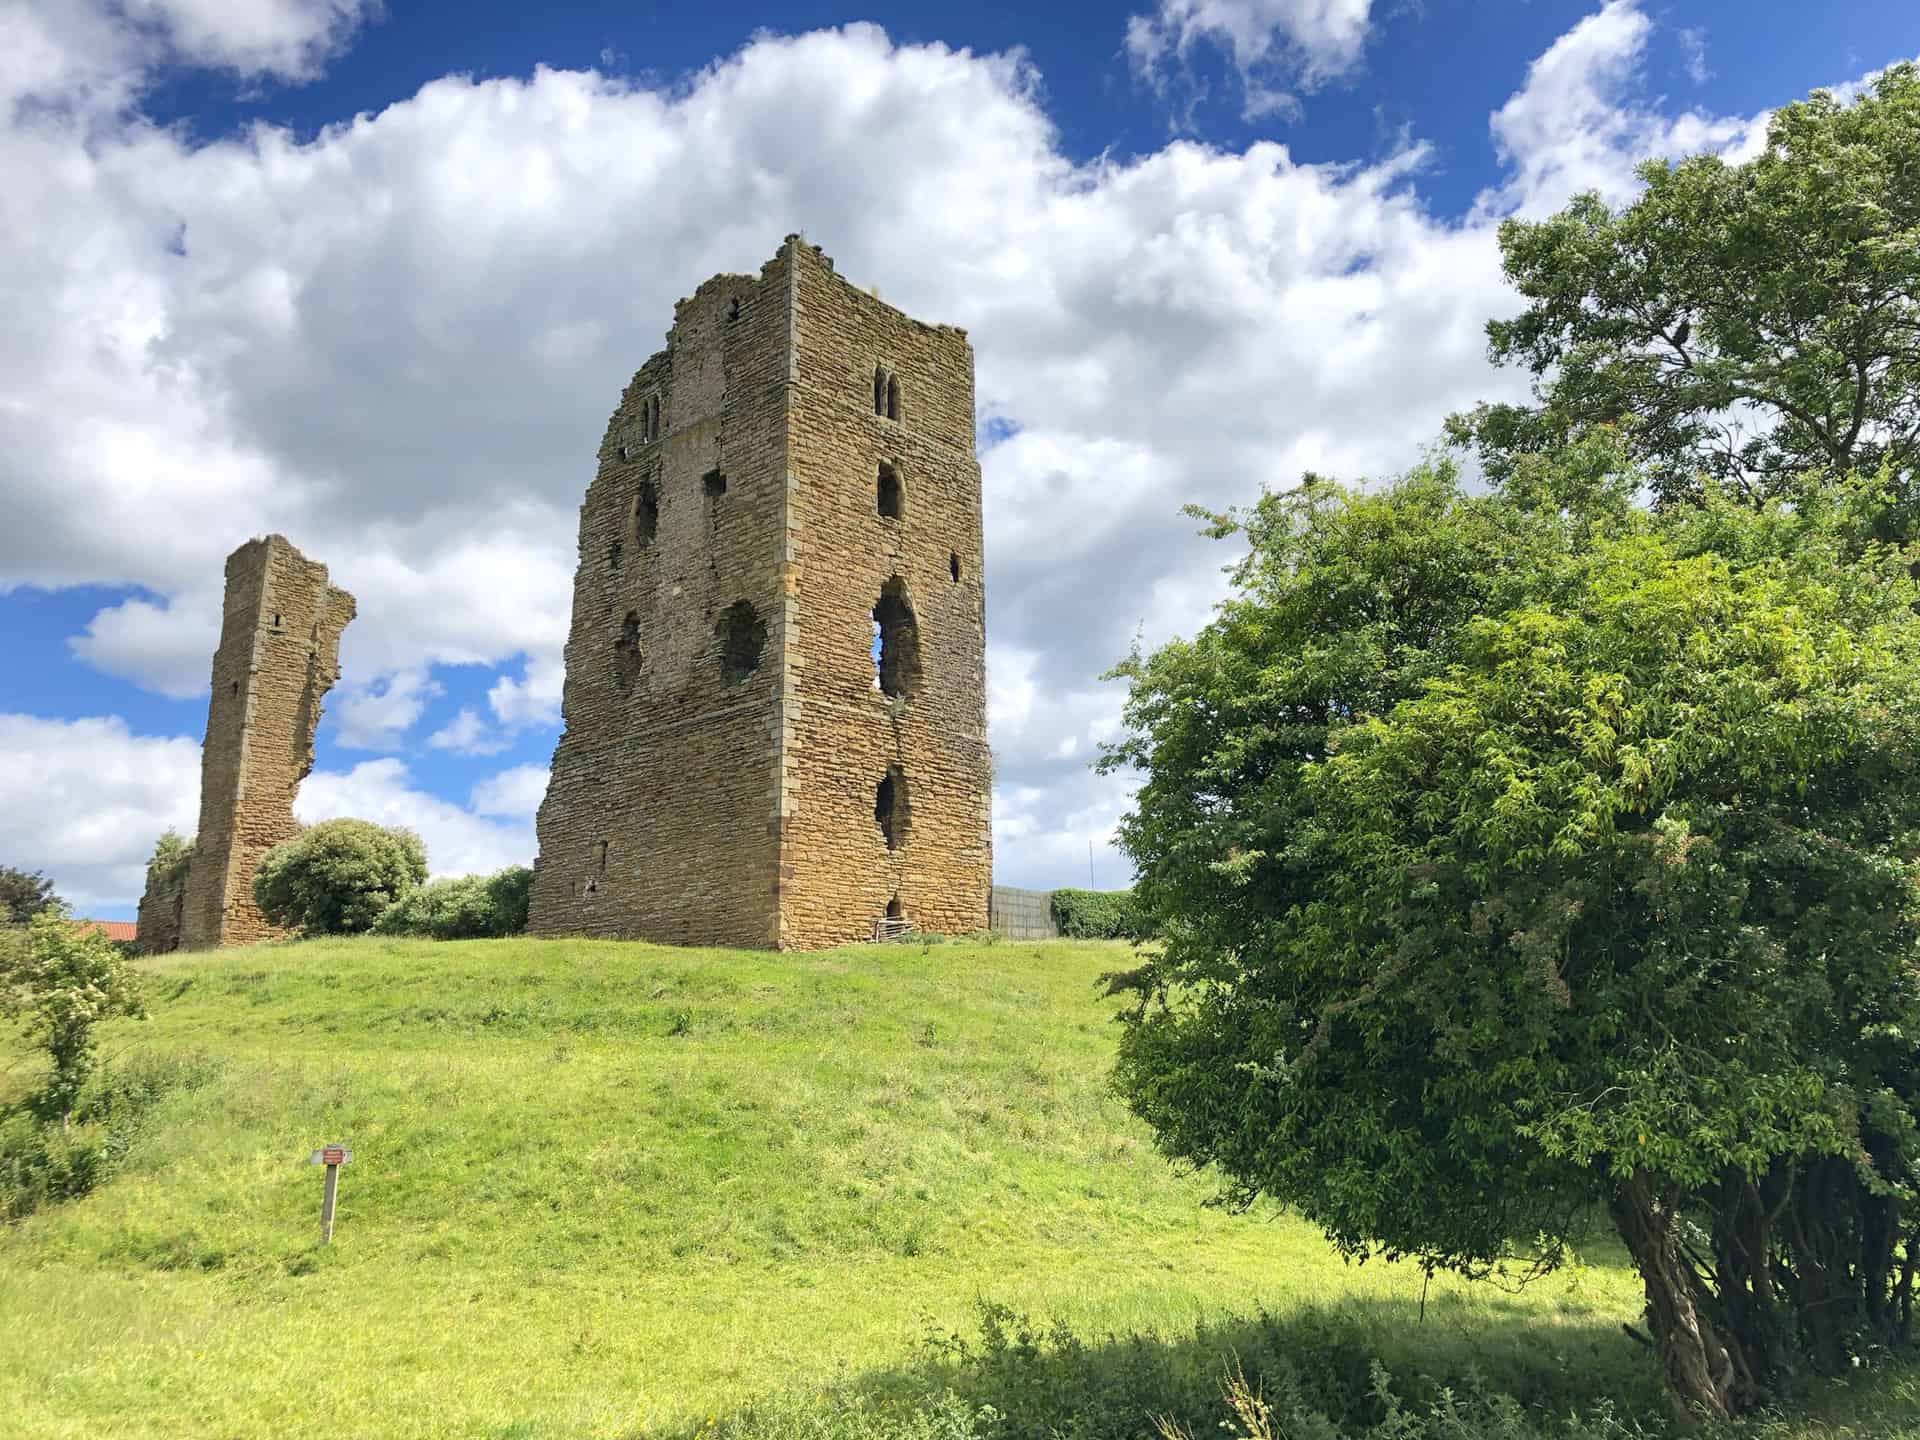 The origins of Sheriff Hutton Castle can be traced back to the reign of King Stephen (circa 1135-1154), when Bertram de Bulmer, Sheriff of York, built a motte and bailey castle in the Forest of Galtres.